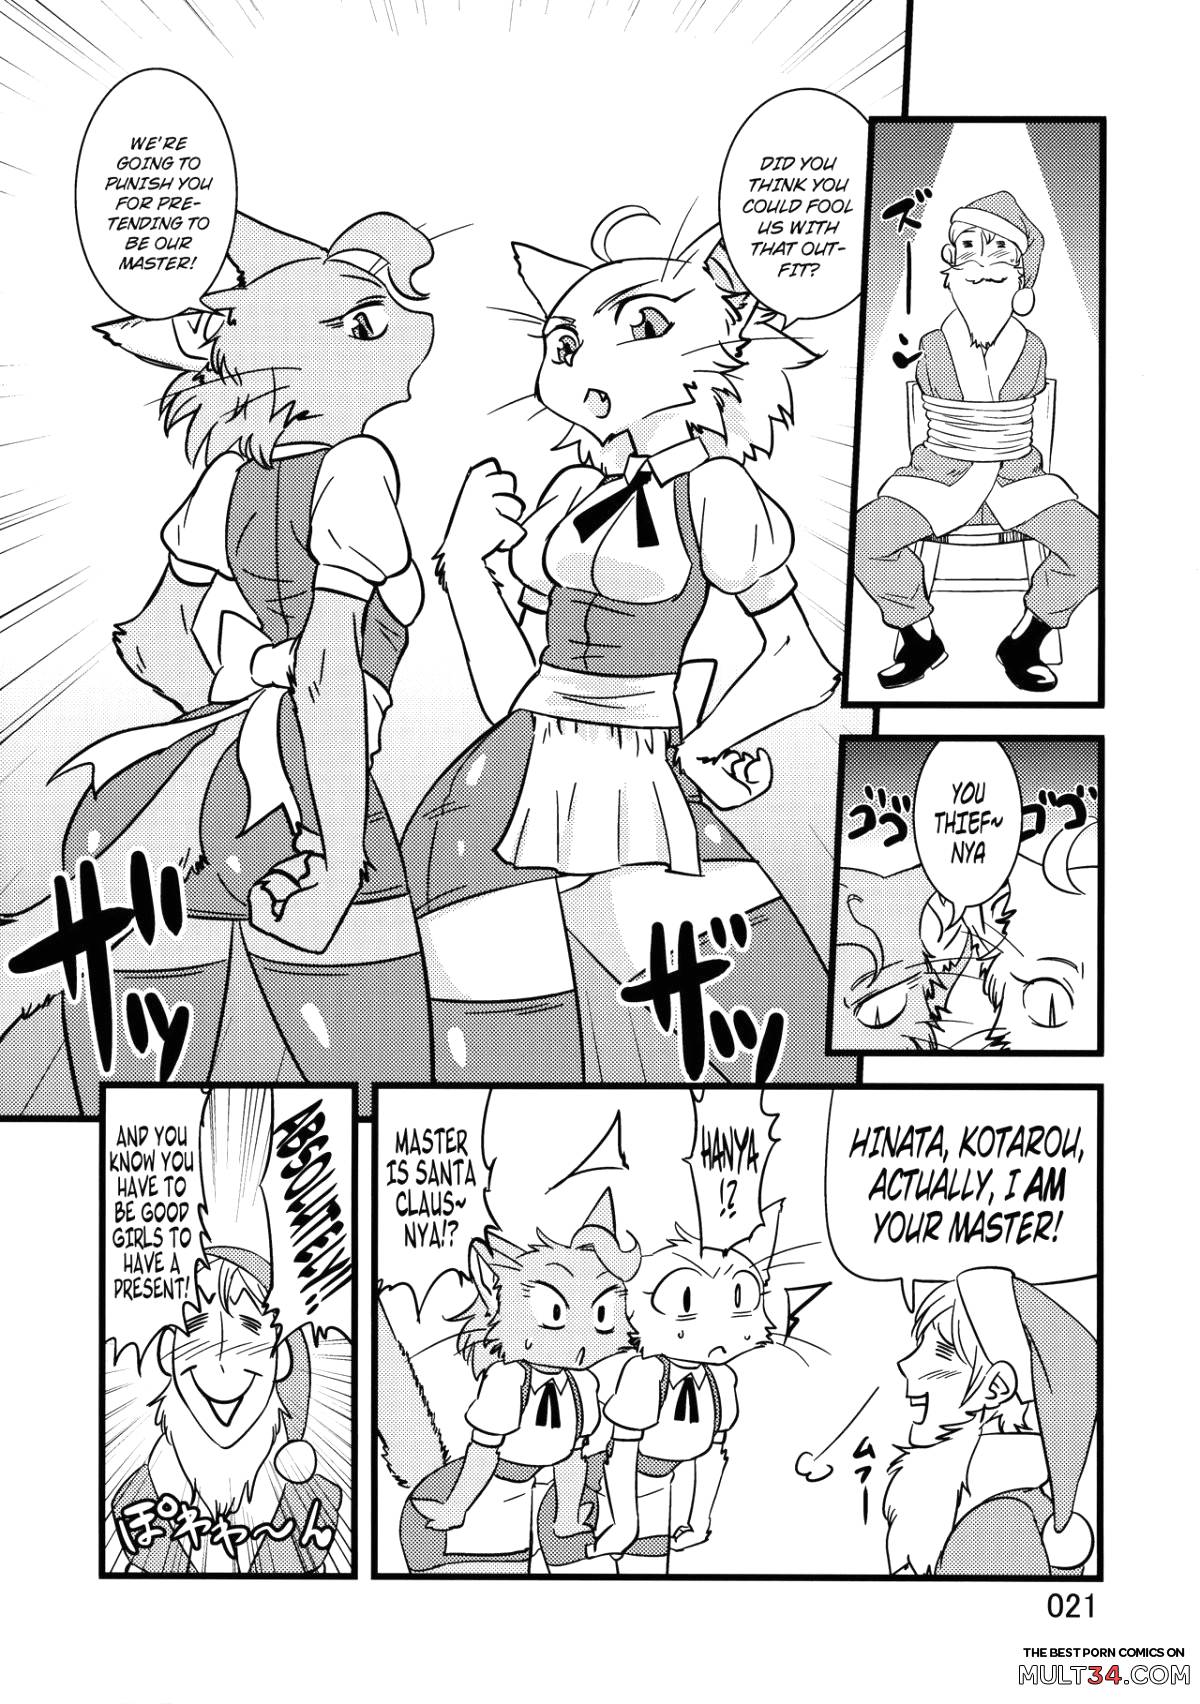 The Heaven I'm In (Kemokko Lovers 3) page 1